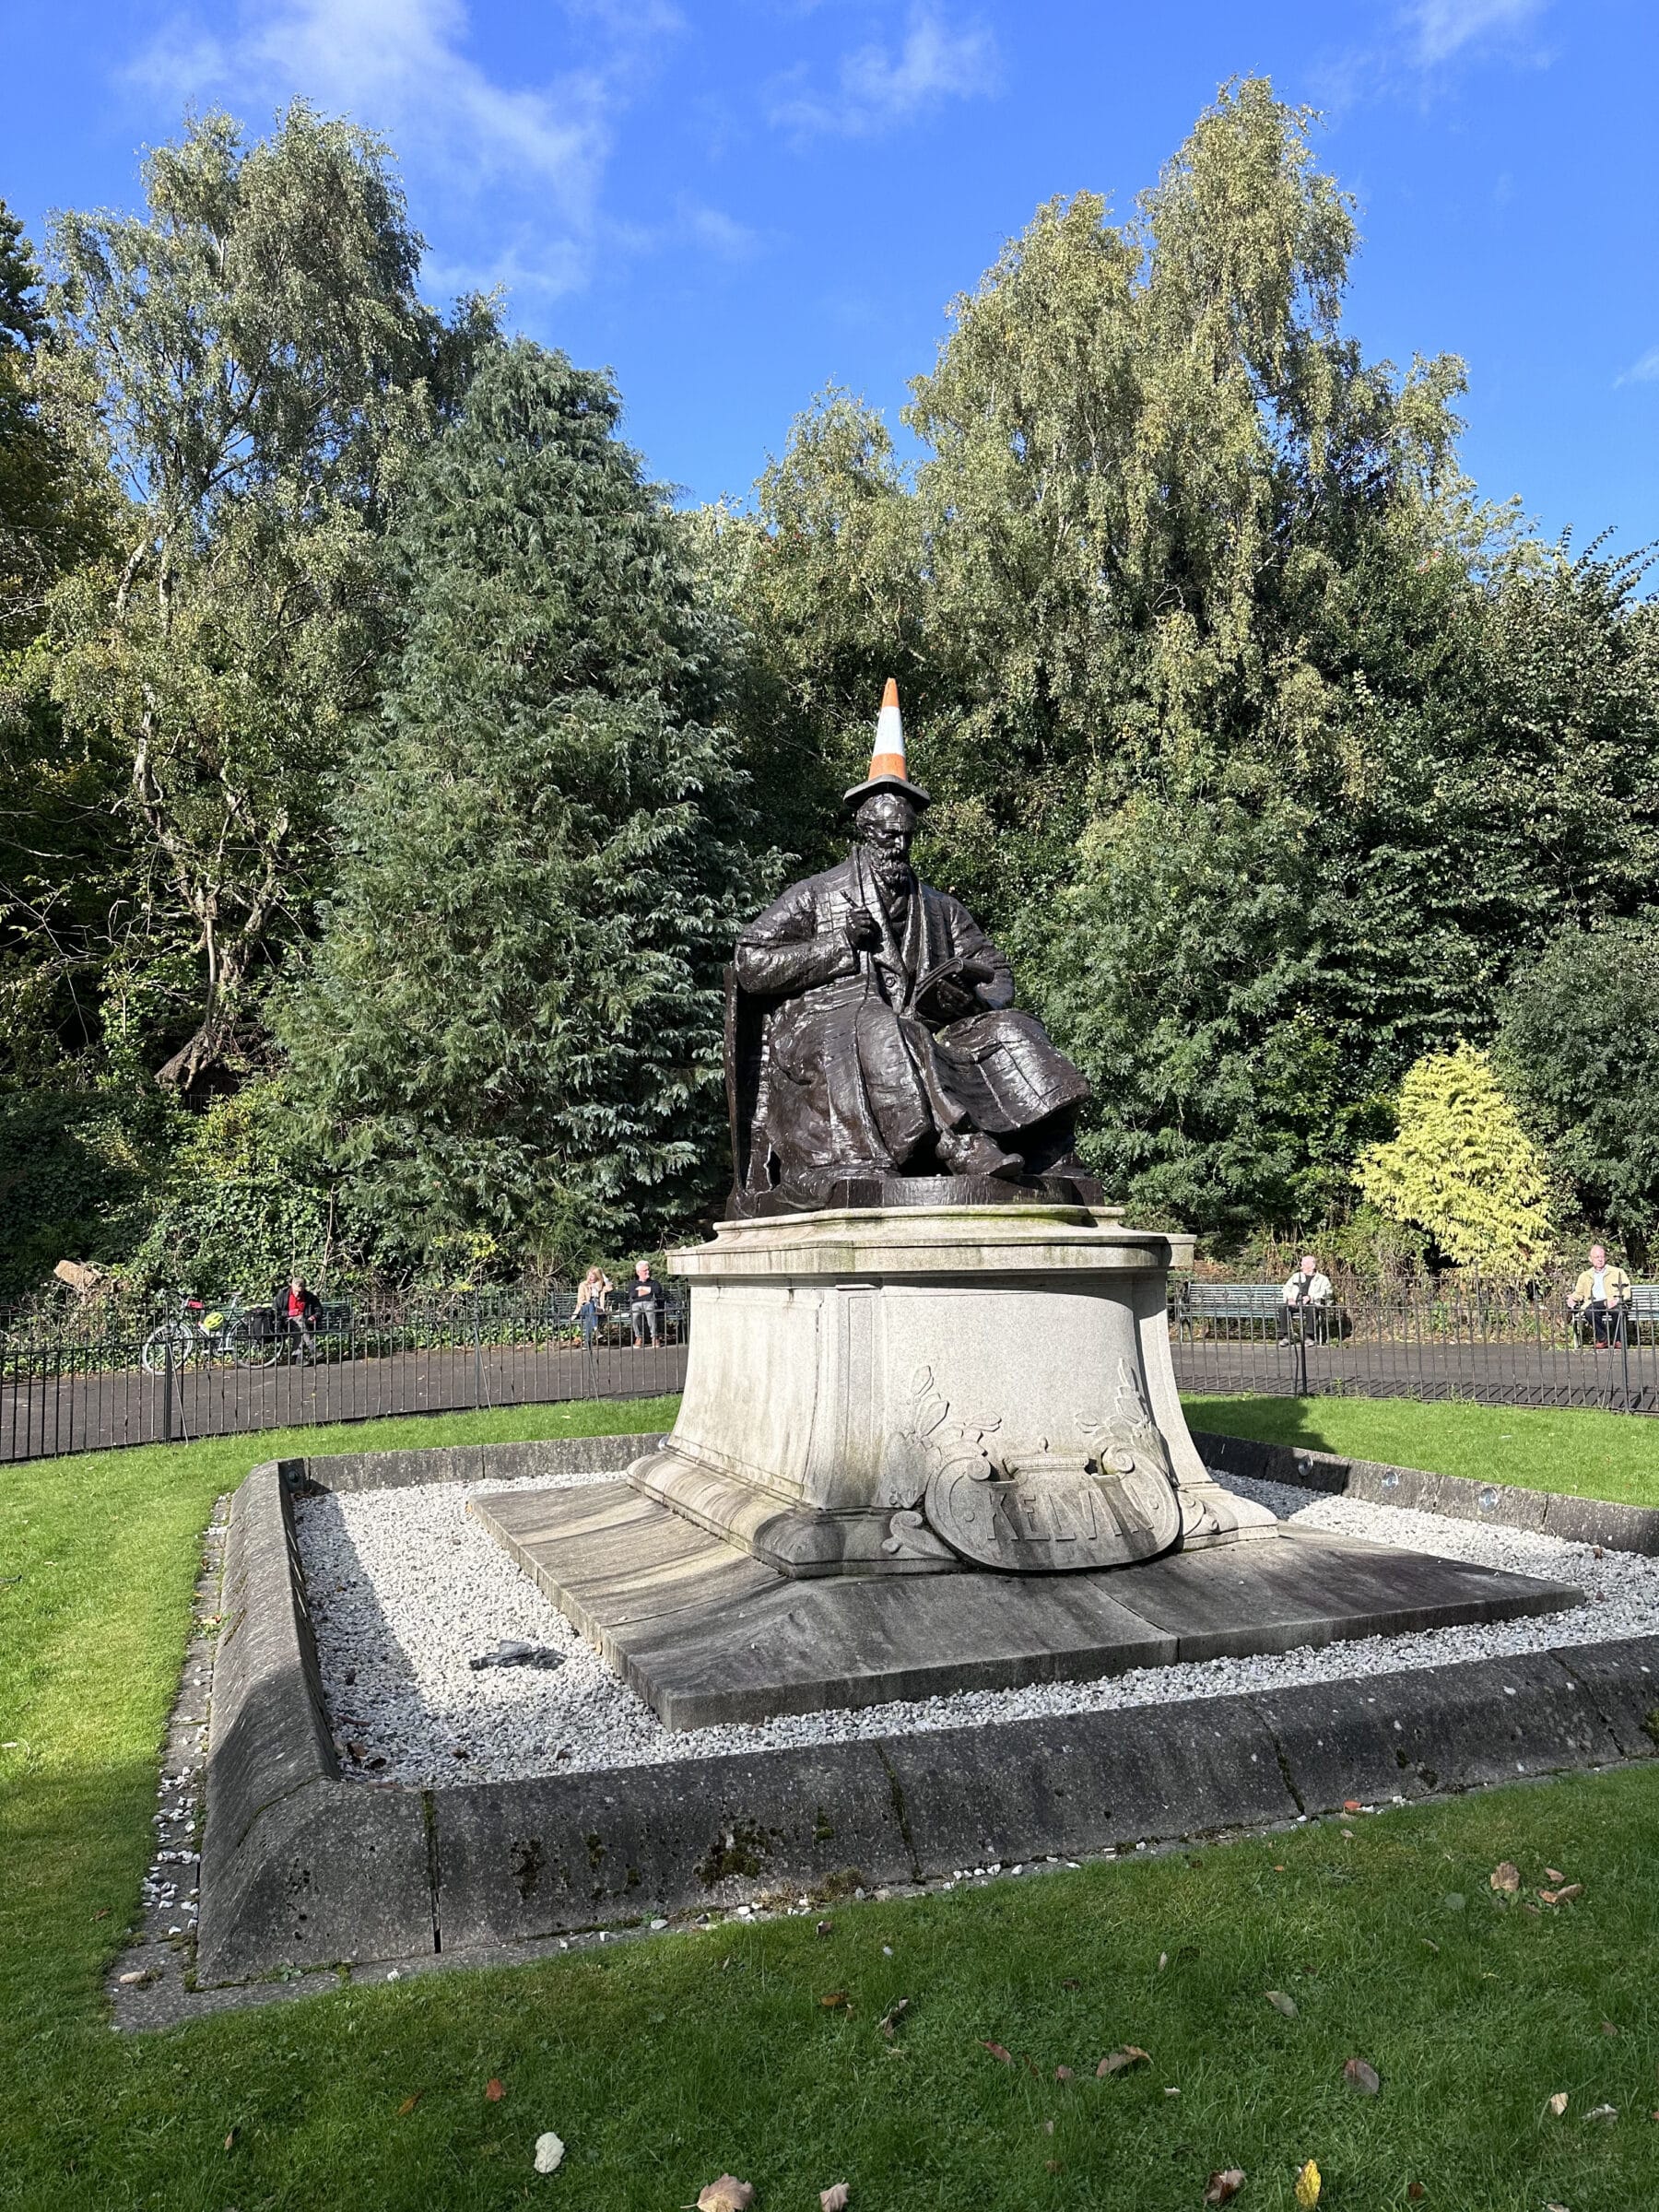 The chance of keeping a traffic cone off Lord Kelvin is absolutely zero